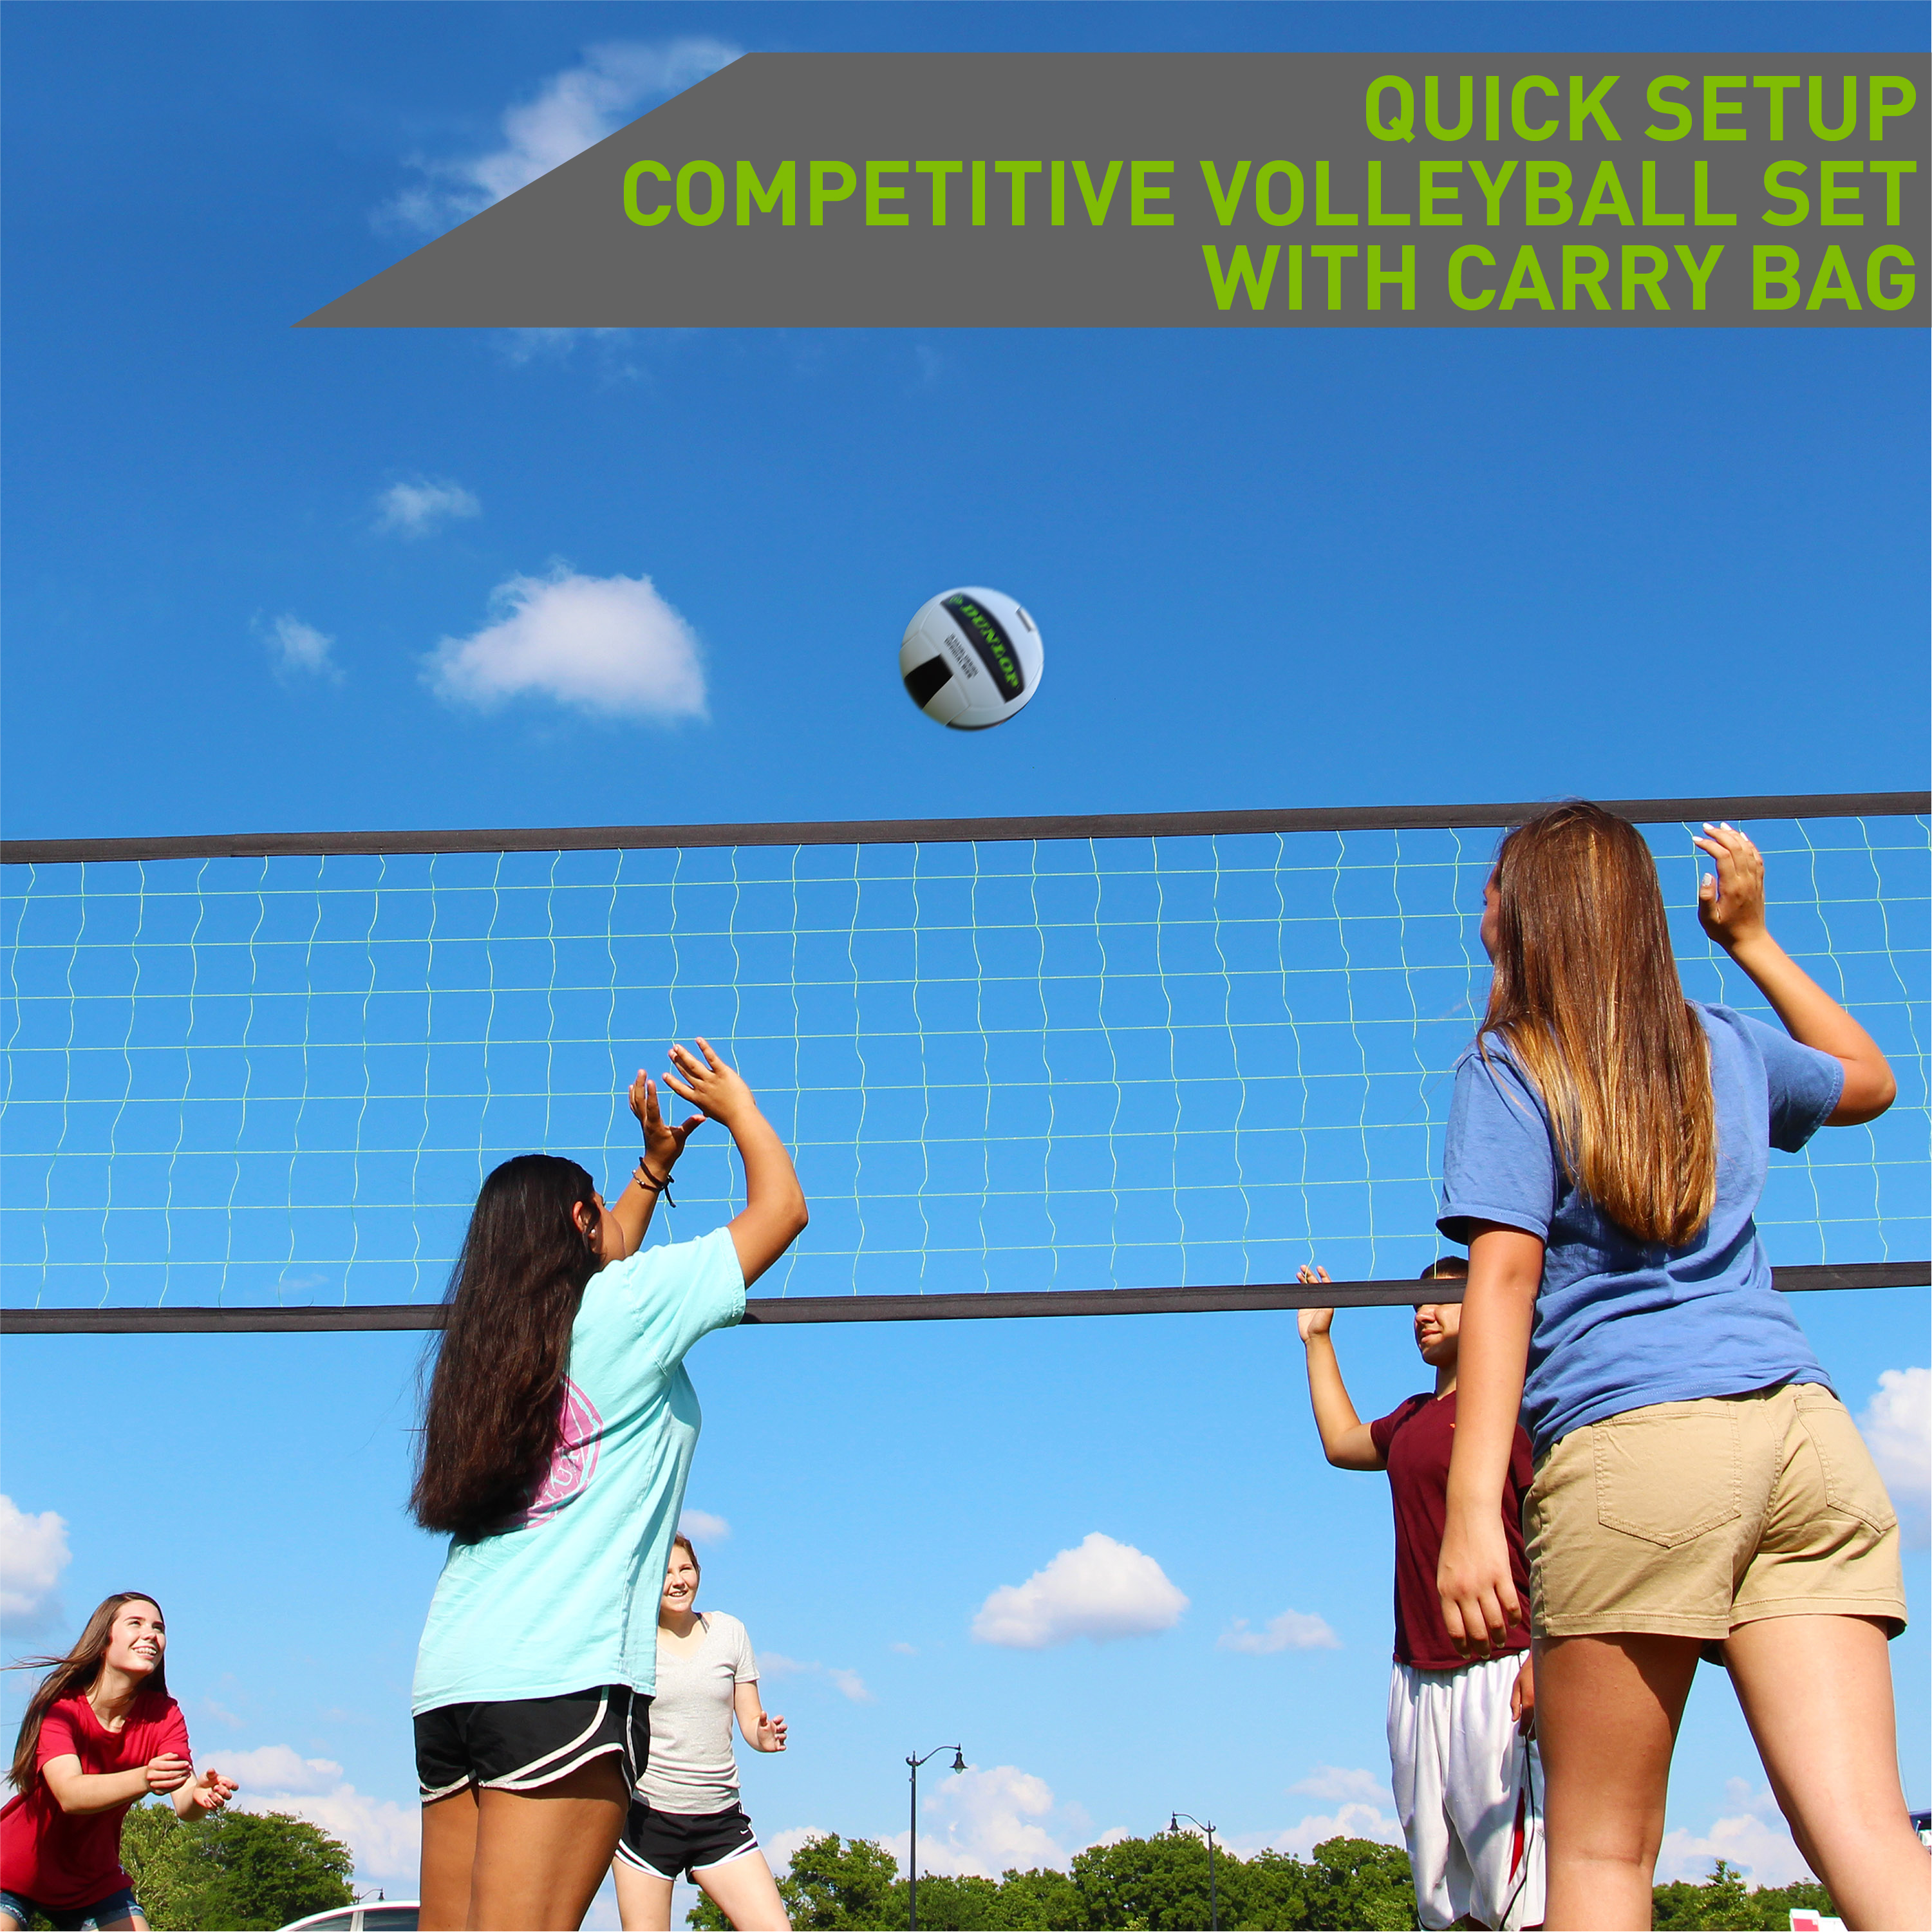 Dunlop Quick Setup Competitive Outdoor Volleyball Set, Green/Black - image 4 of 9